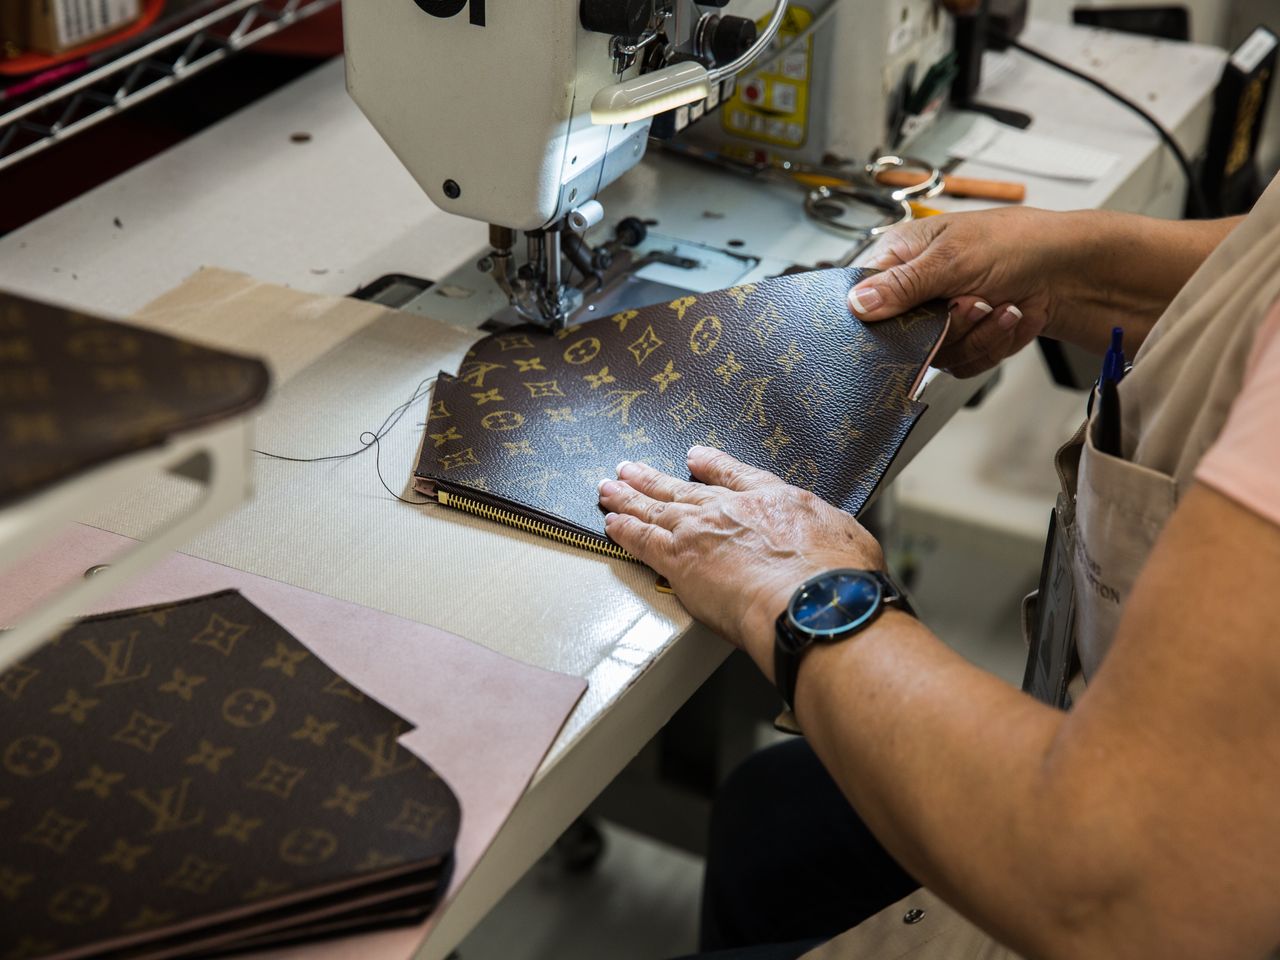 The Art of Craftsmanship: What Are Louis Vuitton Bags Made Of